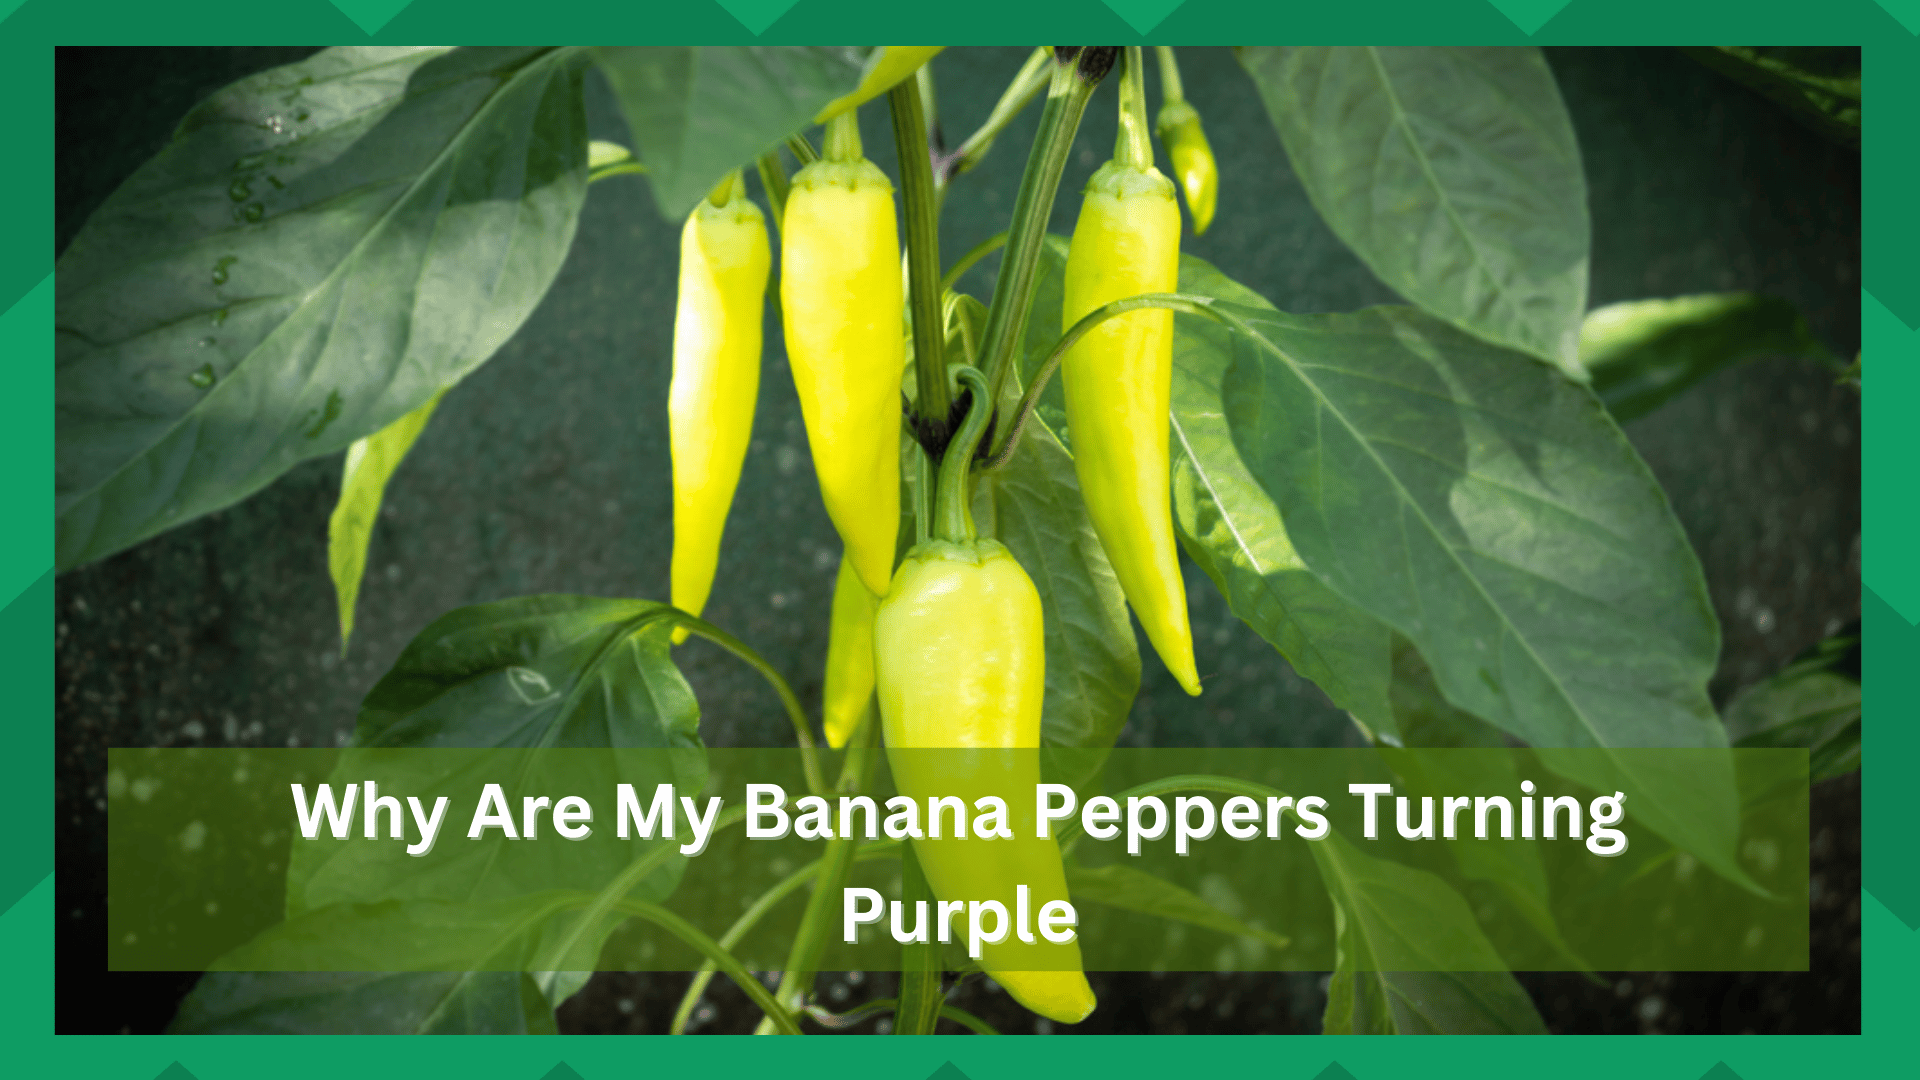 Why Are My Banana Peppers Turning Purple